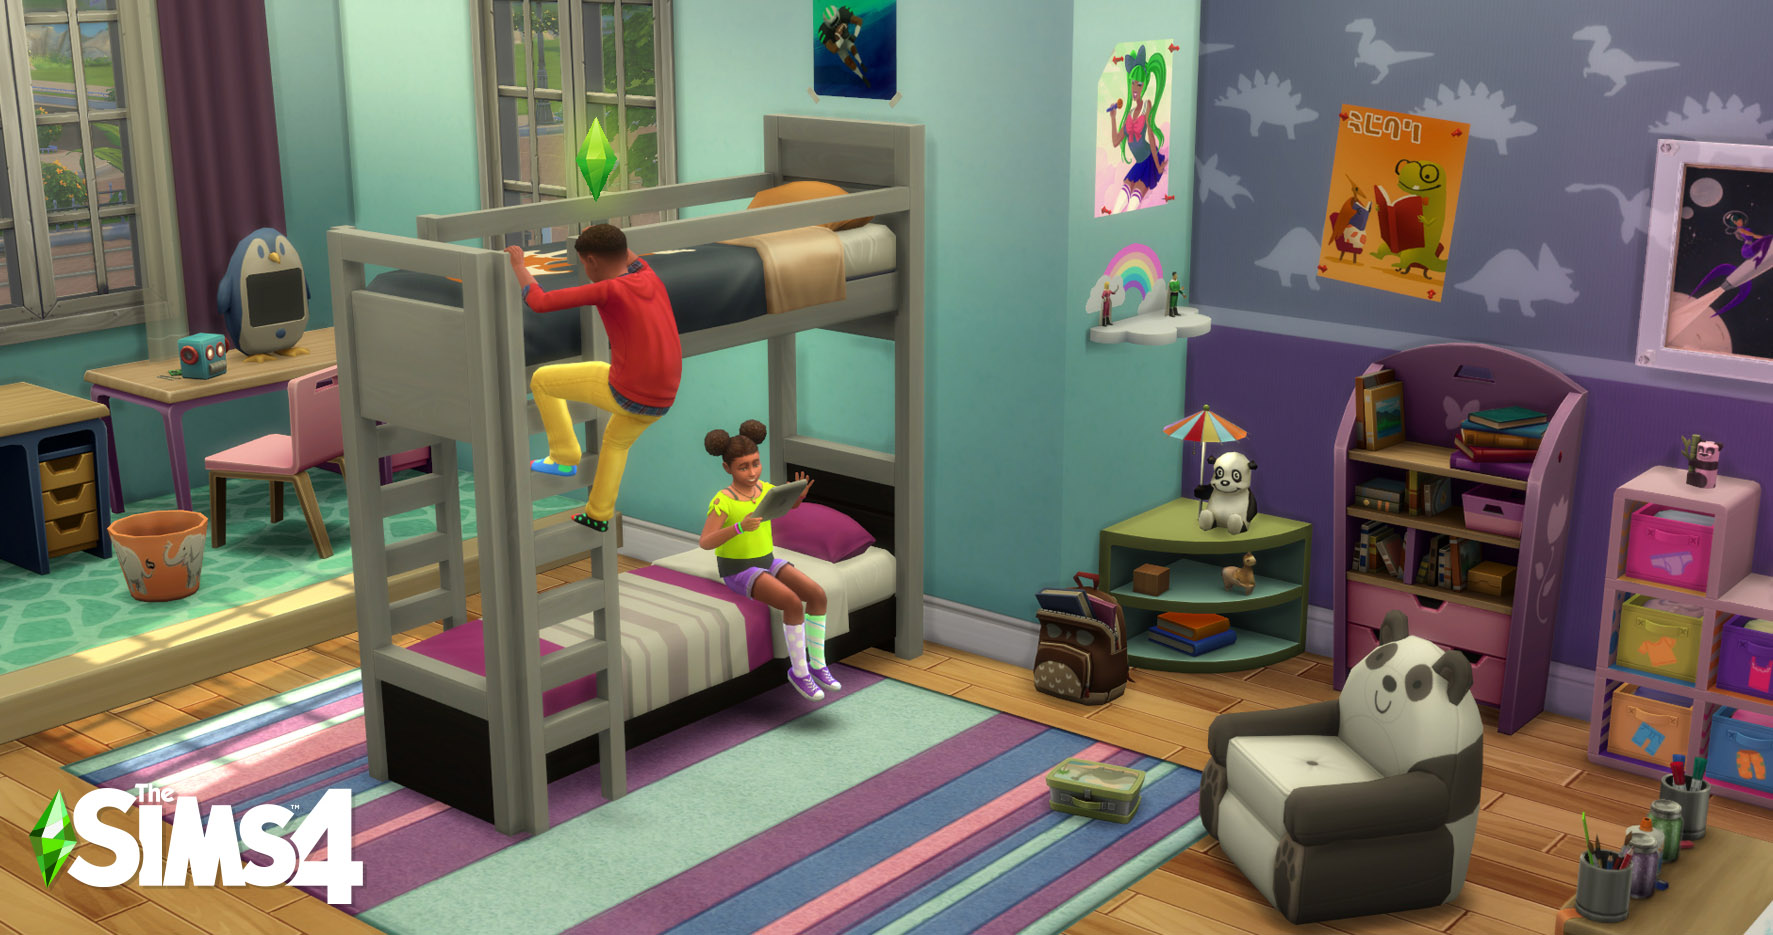 The Sims 4 How To Use Bunk Beds And, How To Make Bunk Beds Sims 4